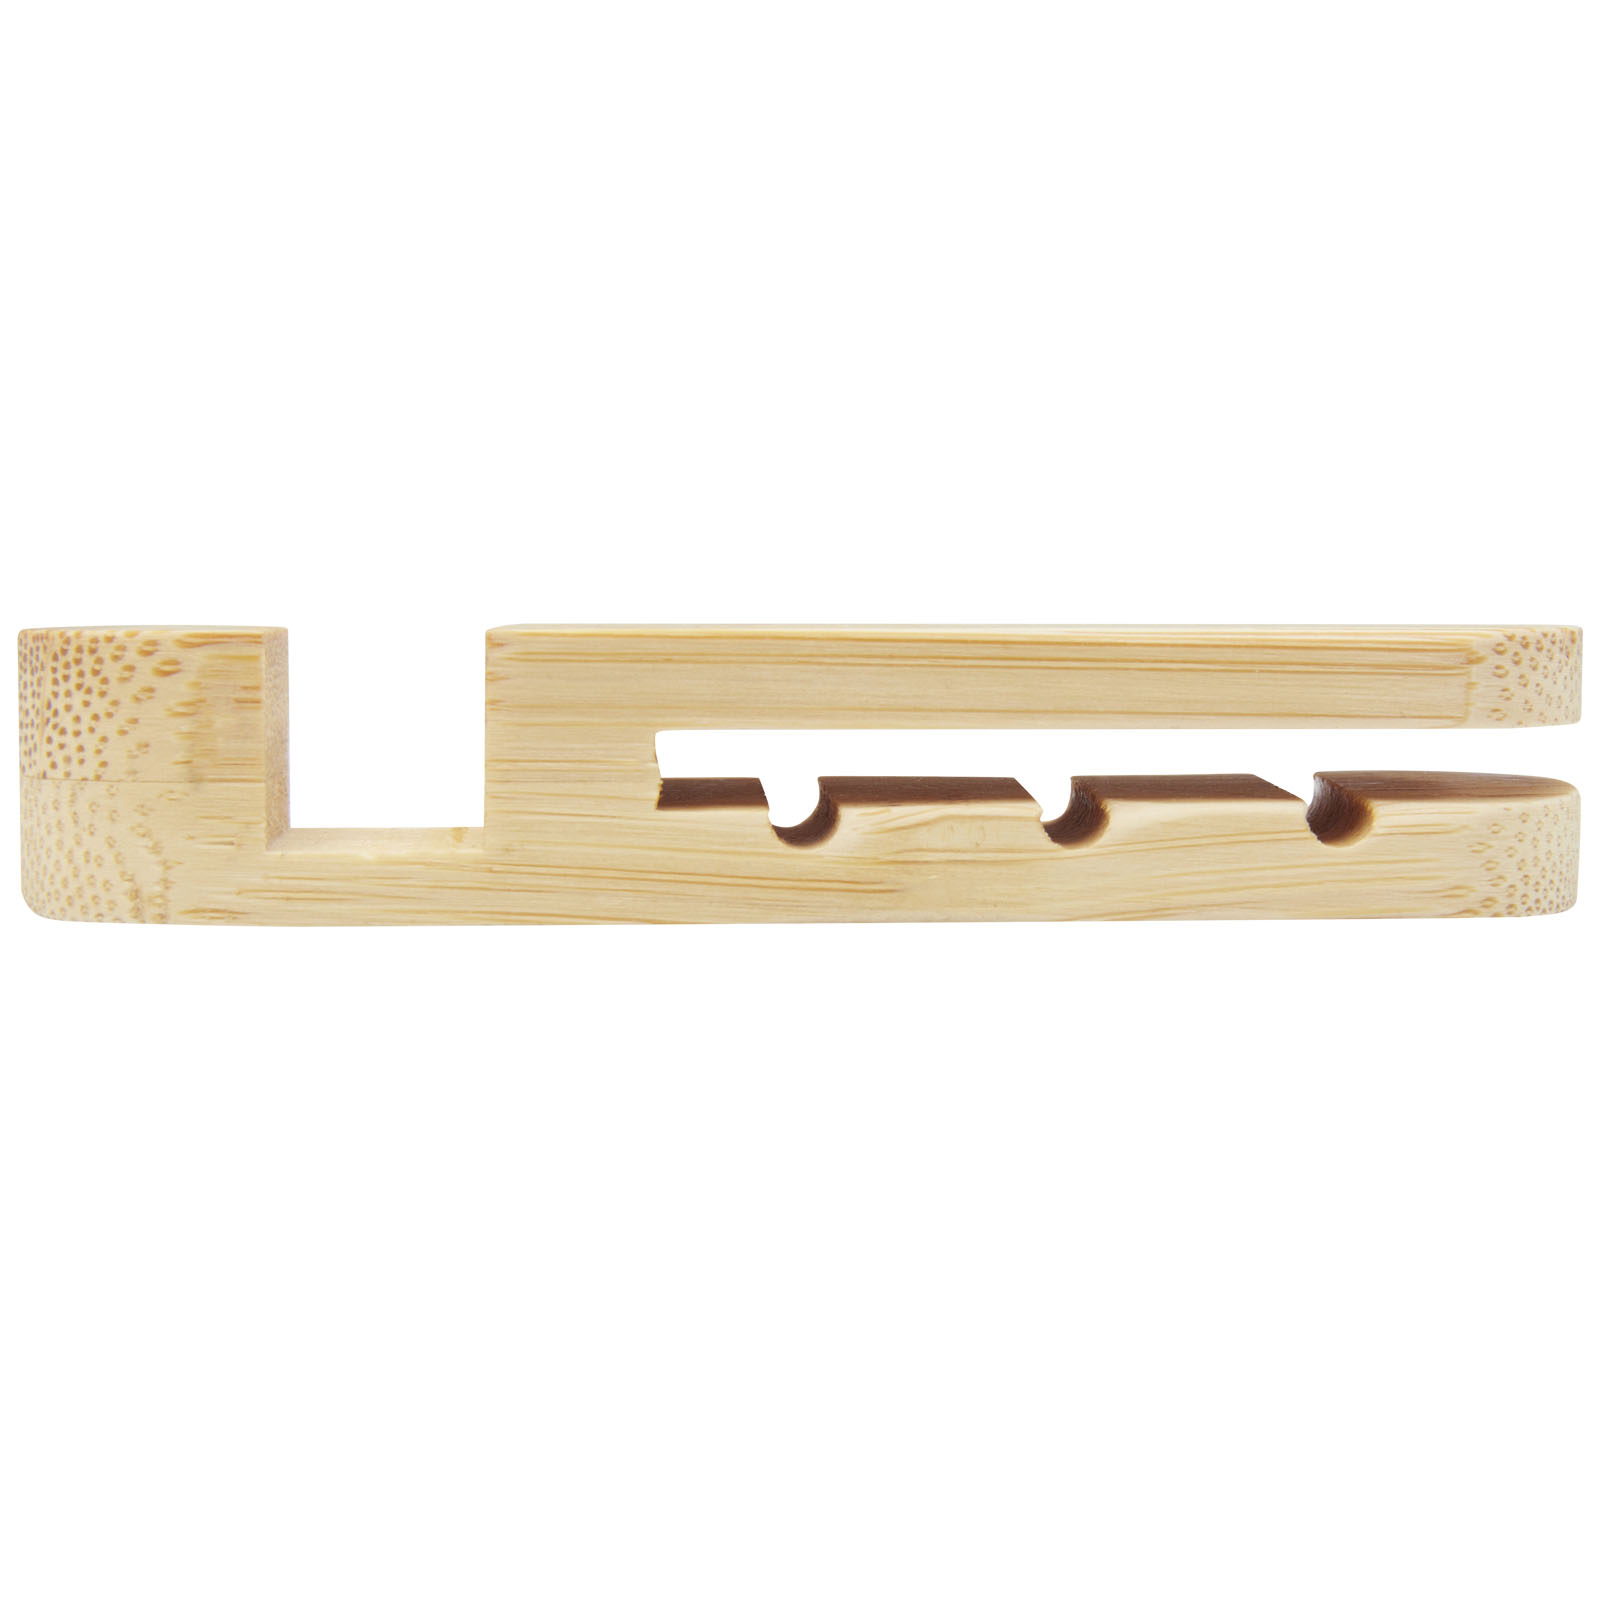 Advertising Telephone & Tablet Accessories - Edulis bamboo cable manager  - 2